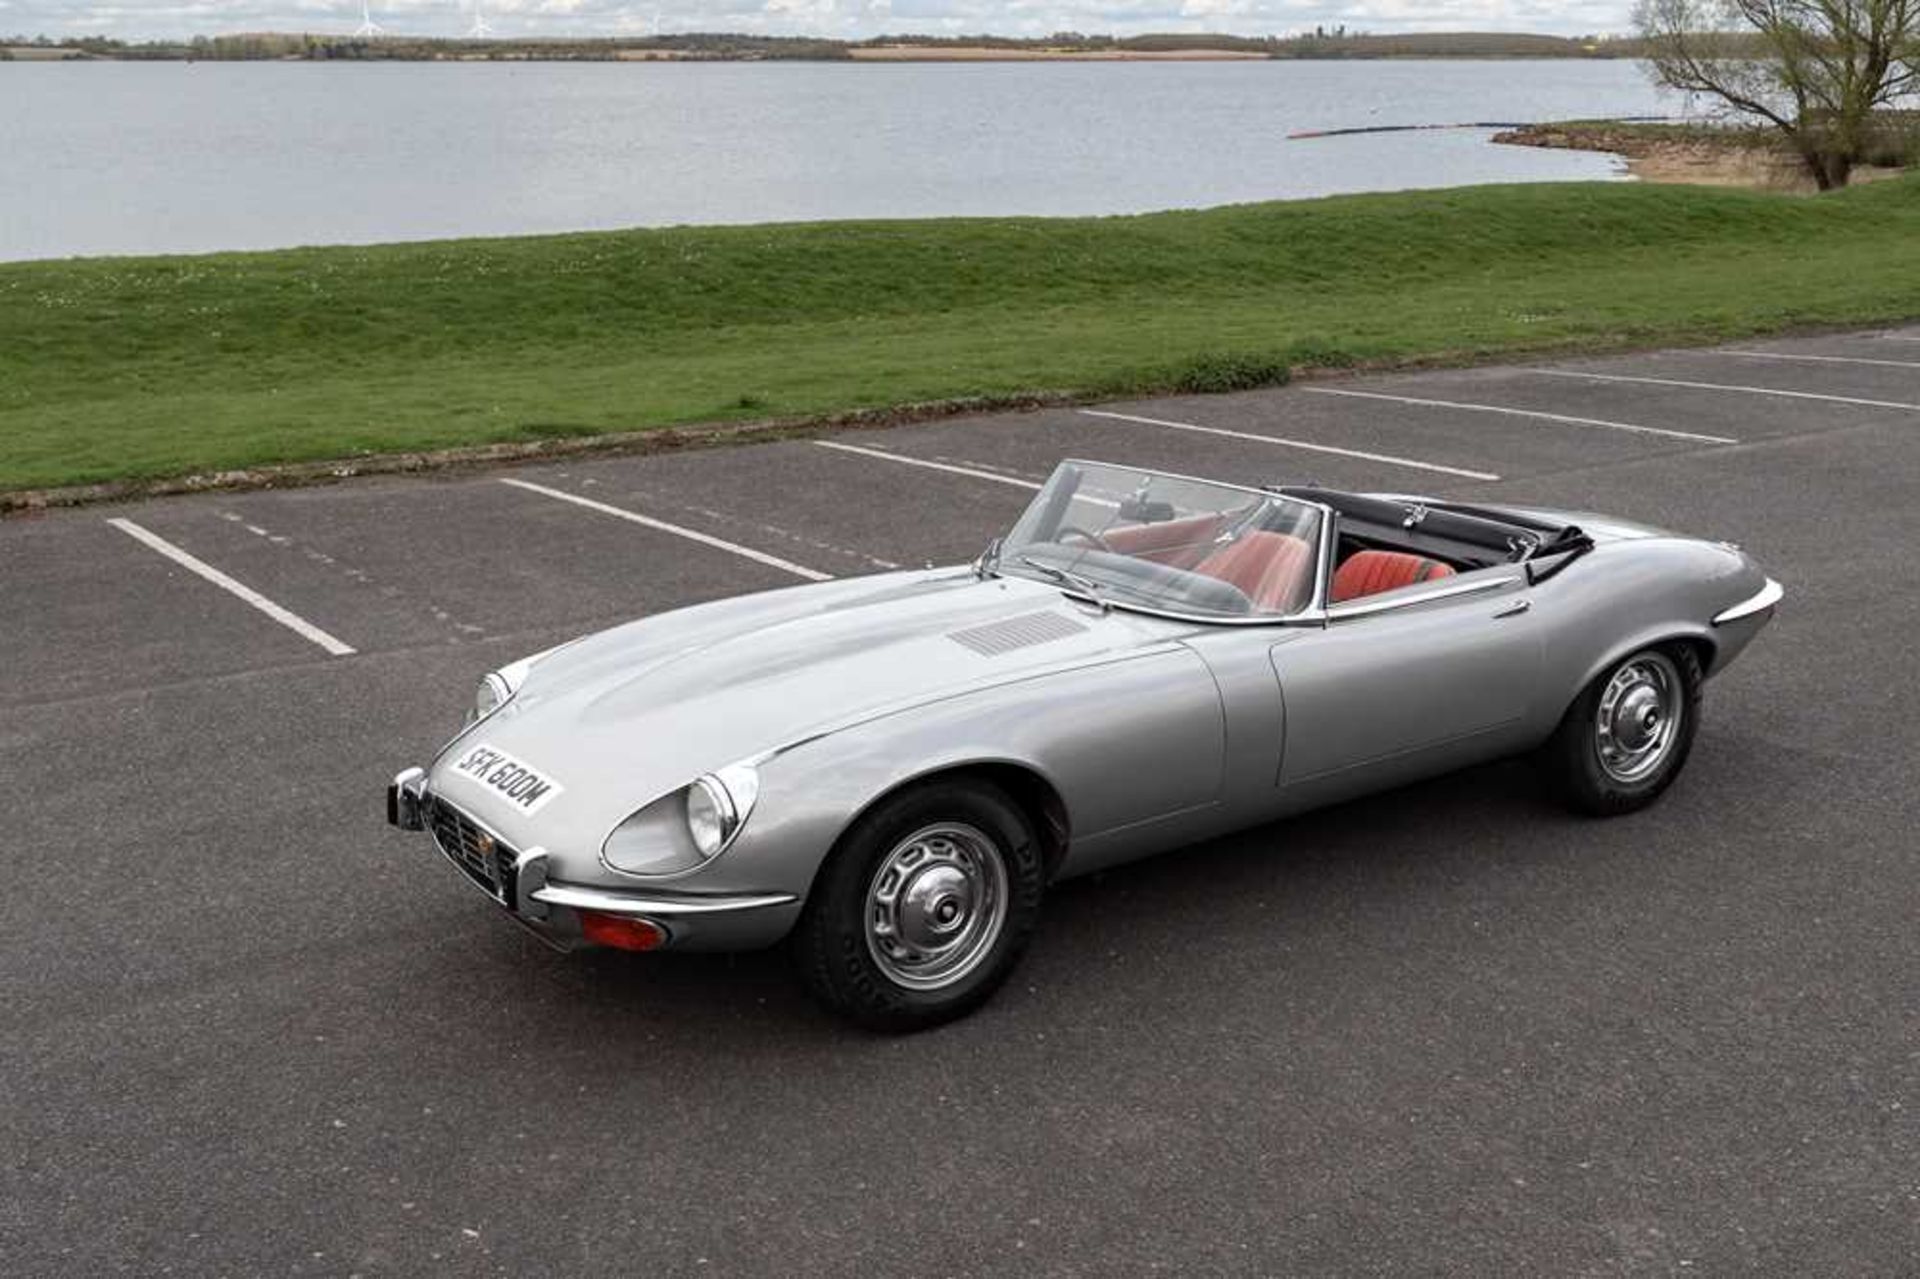 1974 Jaguar E-Type Series III V12 Roadster Only one family owner and 54,412 miles from new - Image 2 of 89